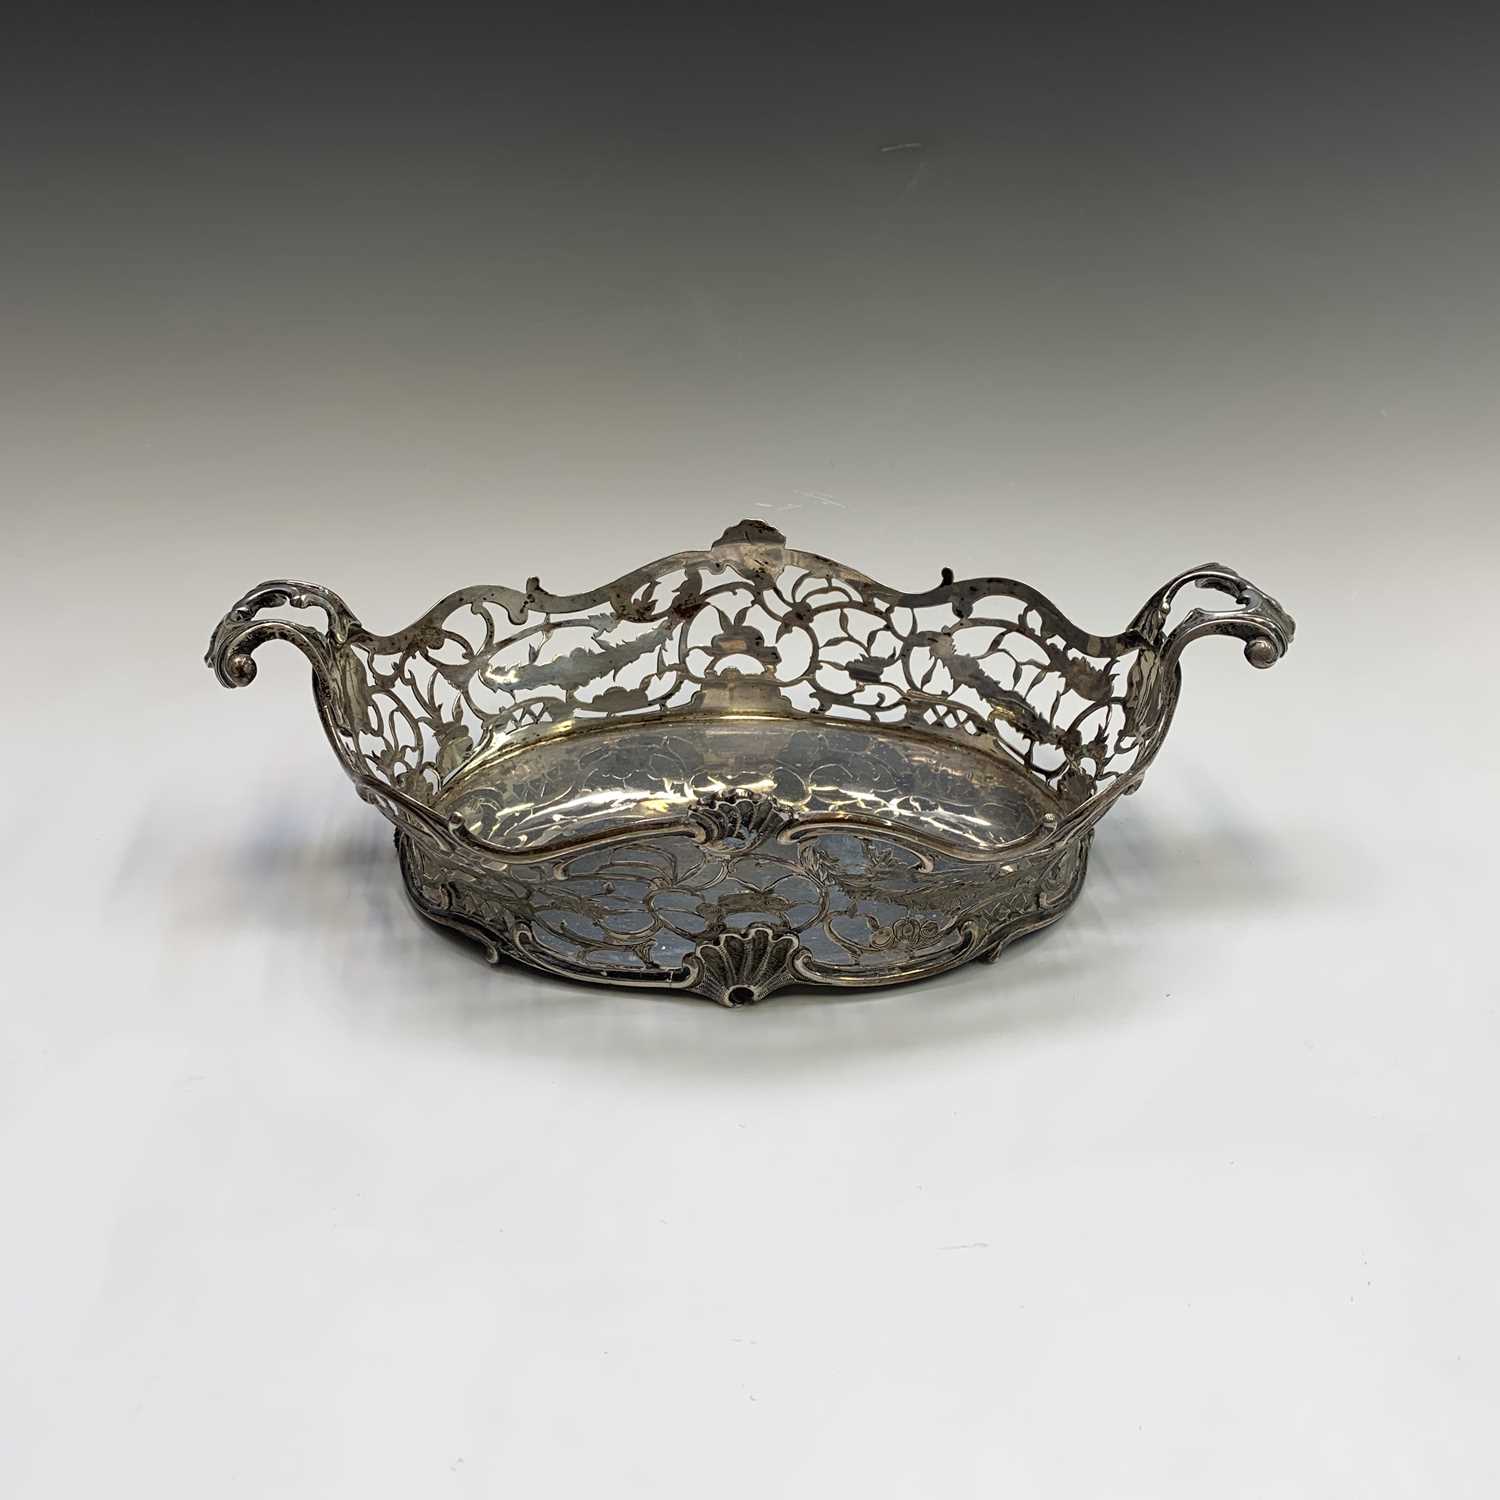 A fine bread basket by Daniel & John Wellby London 1904 in the rococo taste with cast shells and - Image 3 of 6